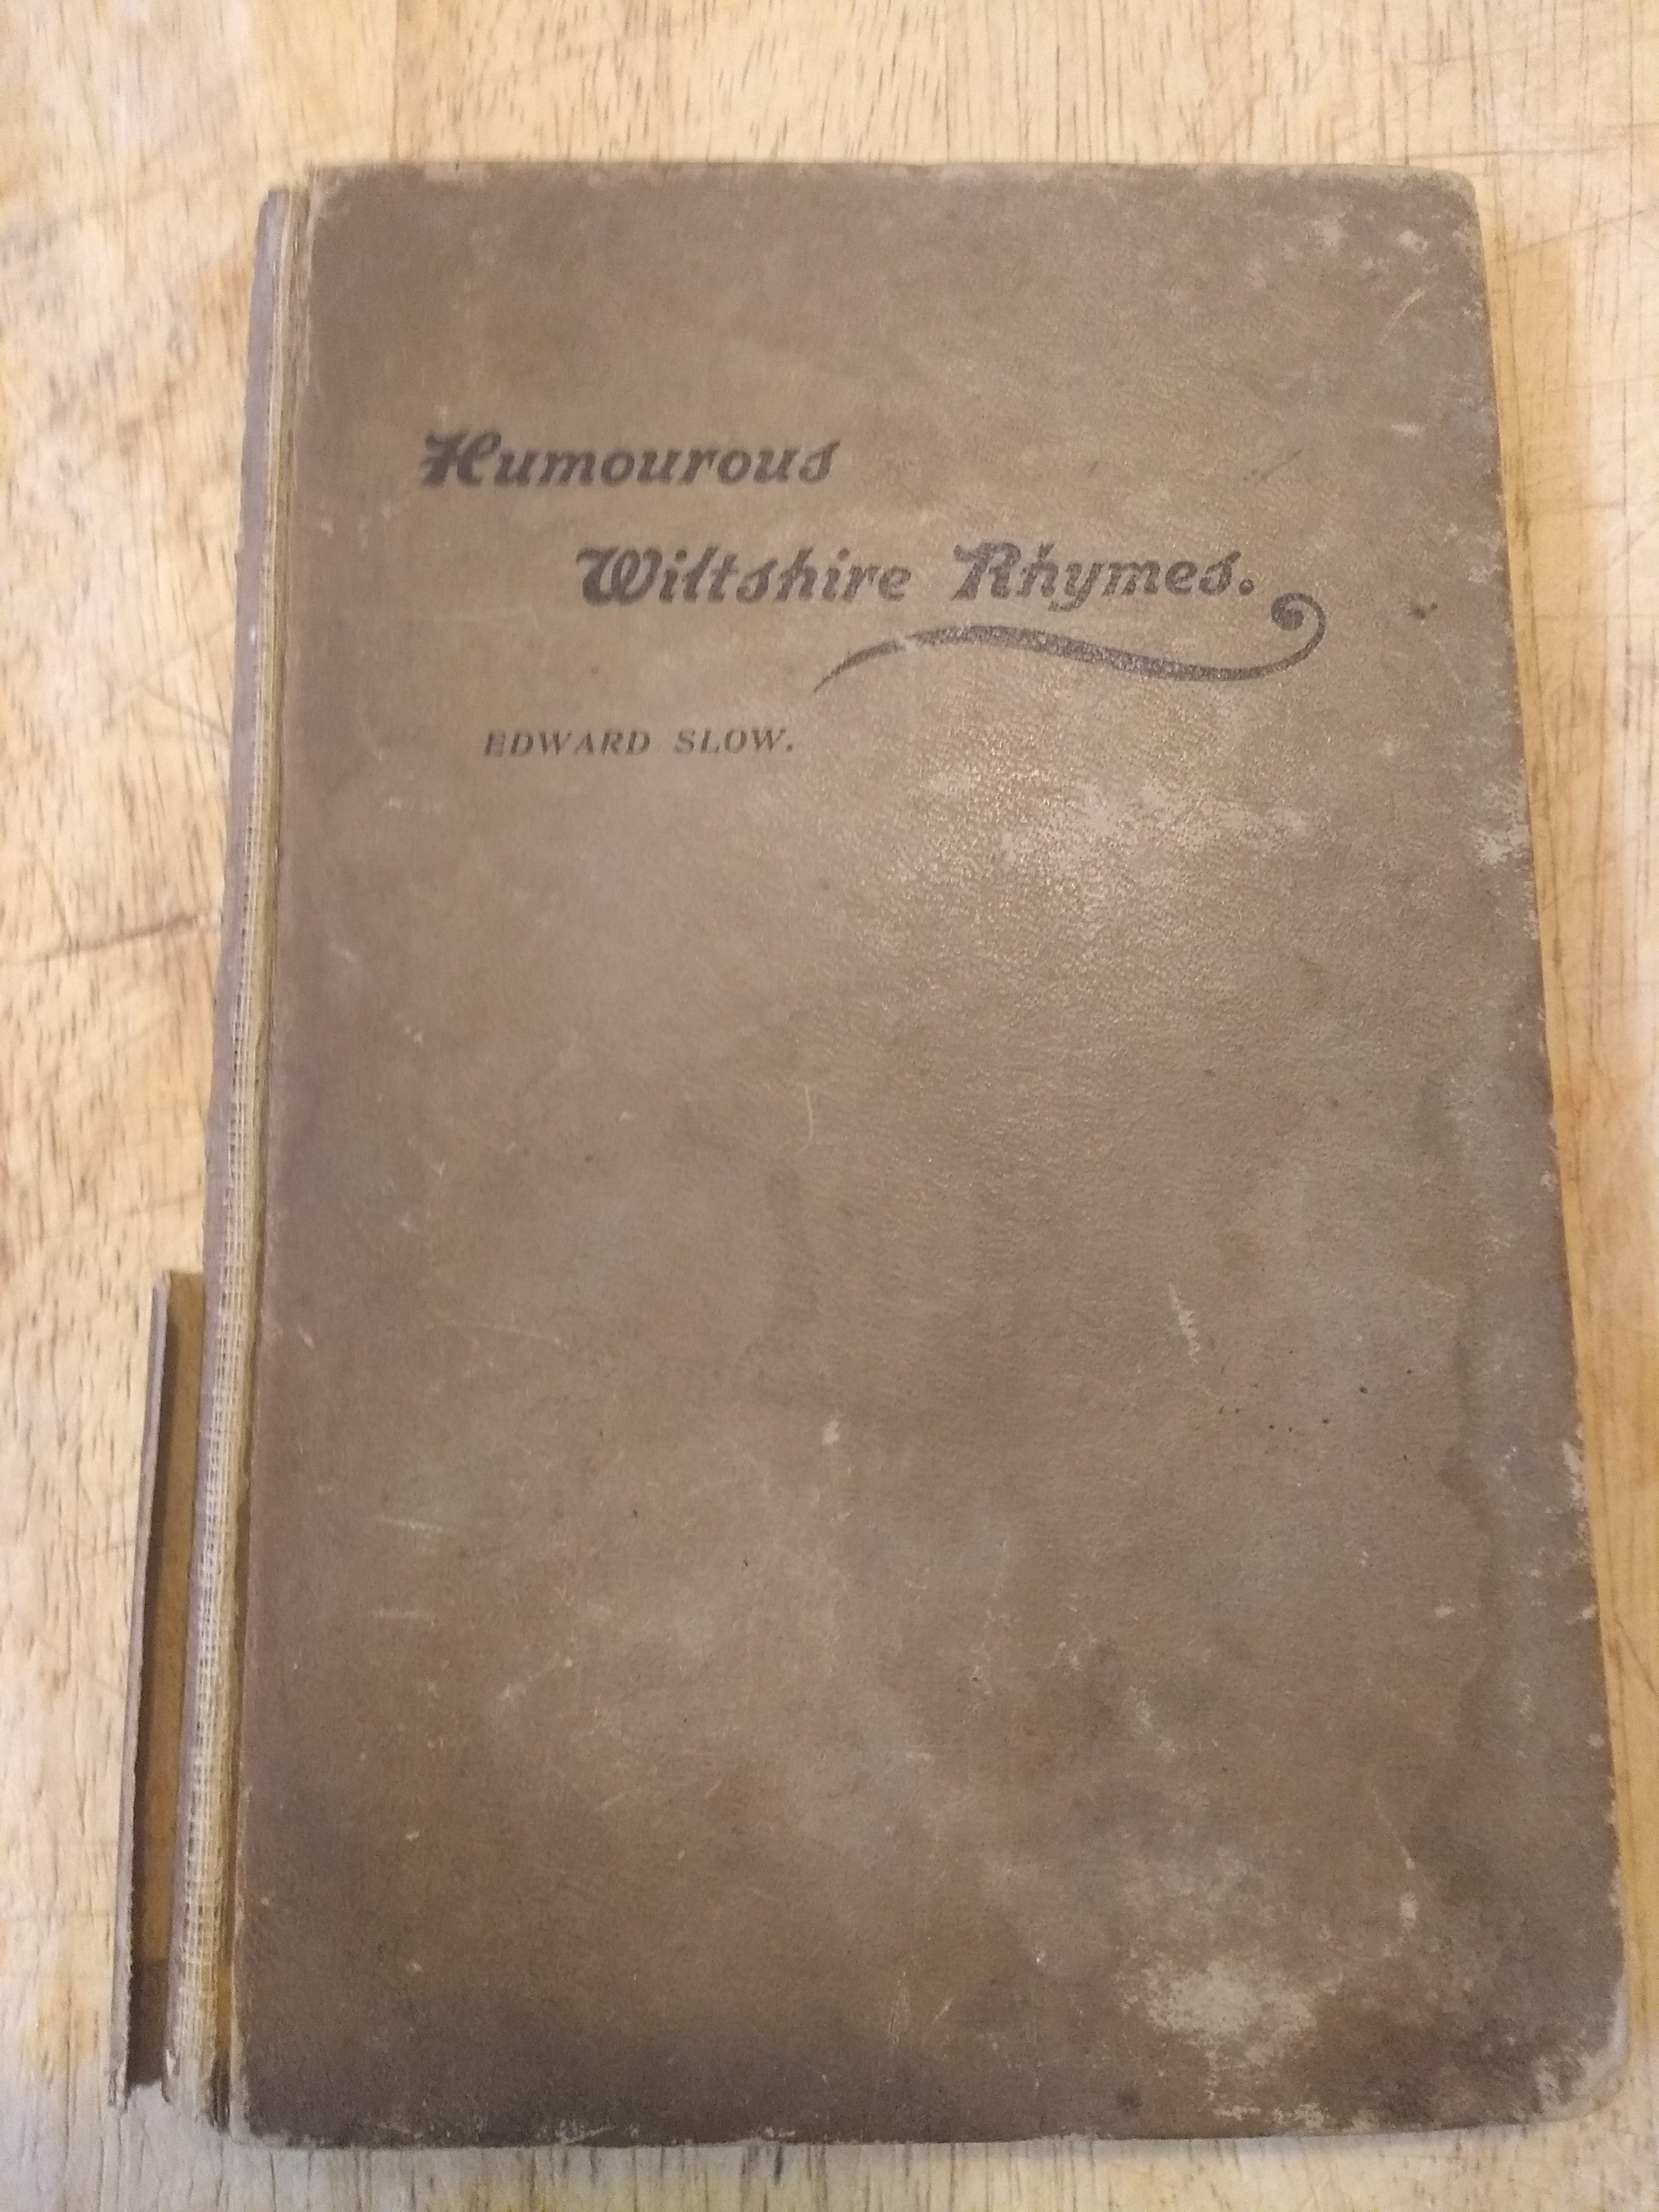 Humourous Wiltshire Rhymes, by Edward Slow